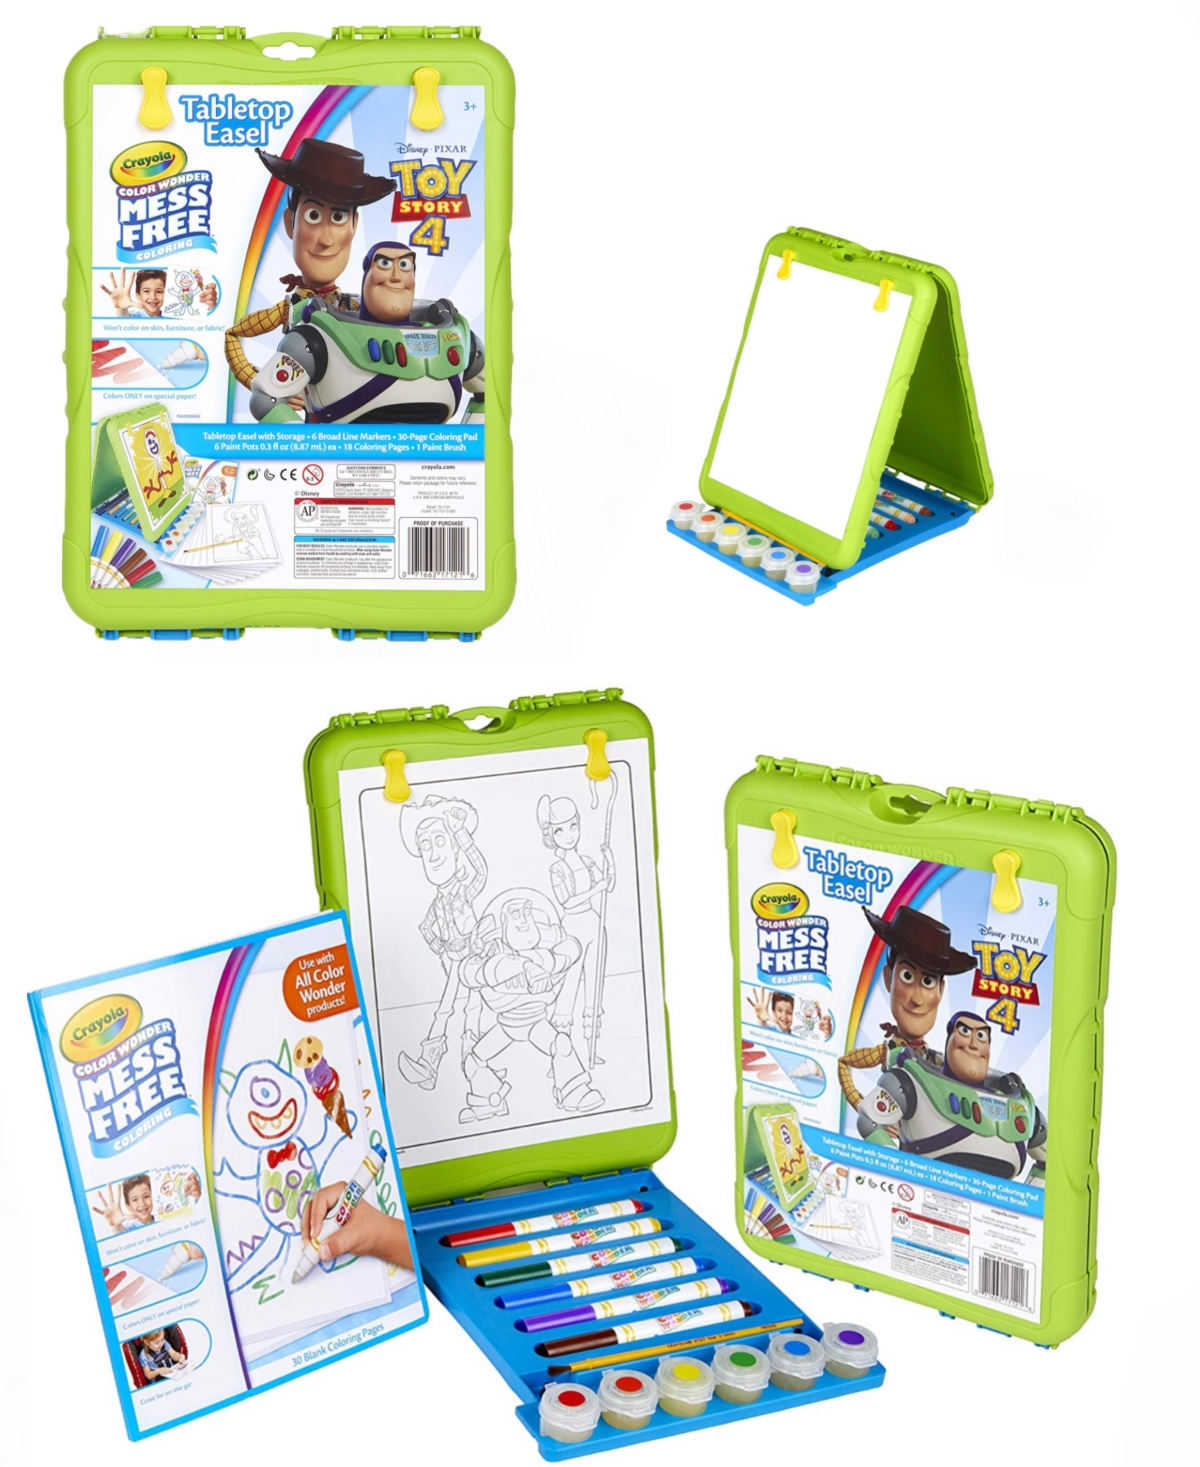 Crayola- Toy Story 4 Easel Travel System - Multi Colored